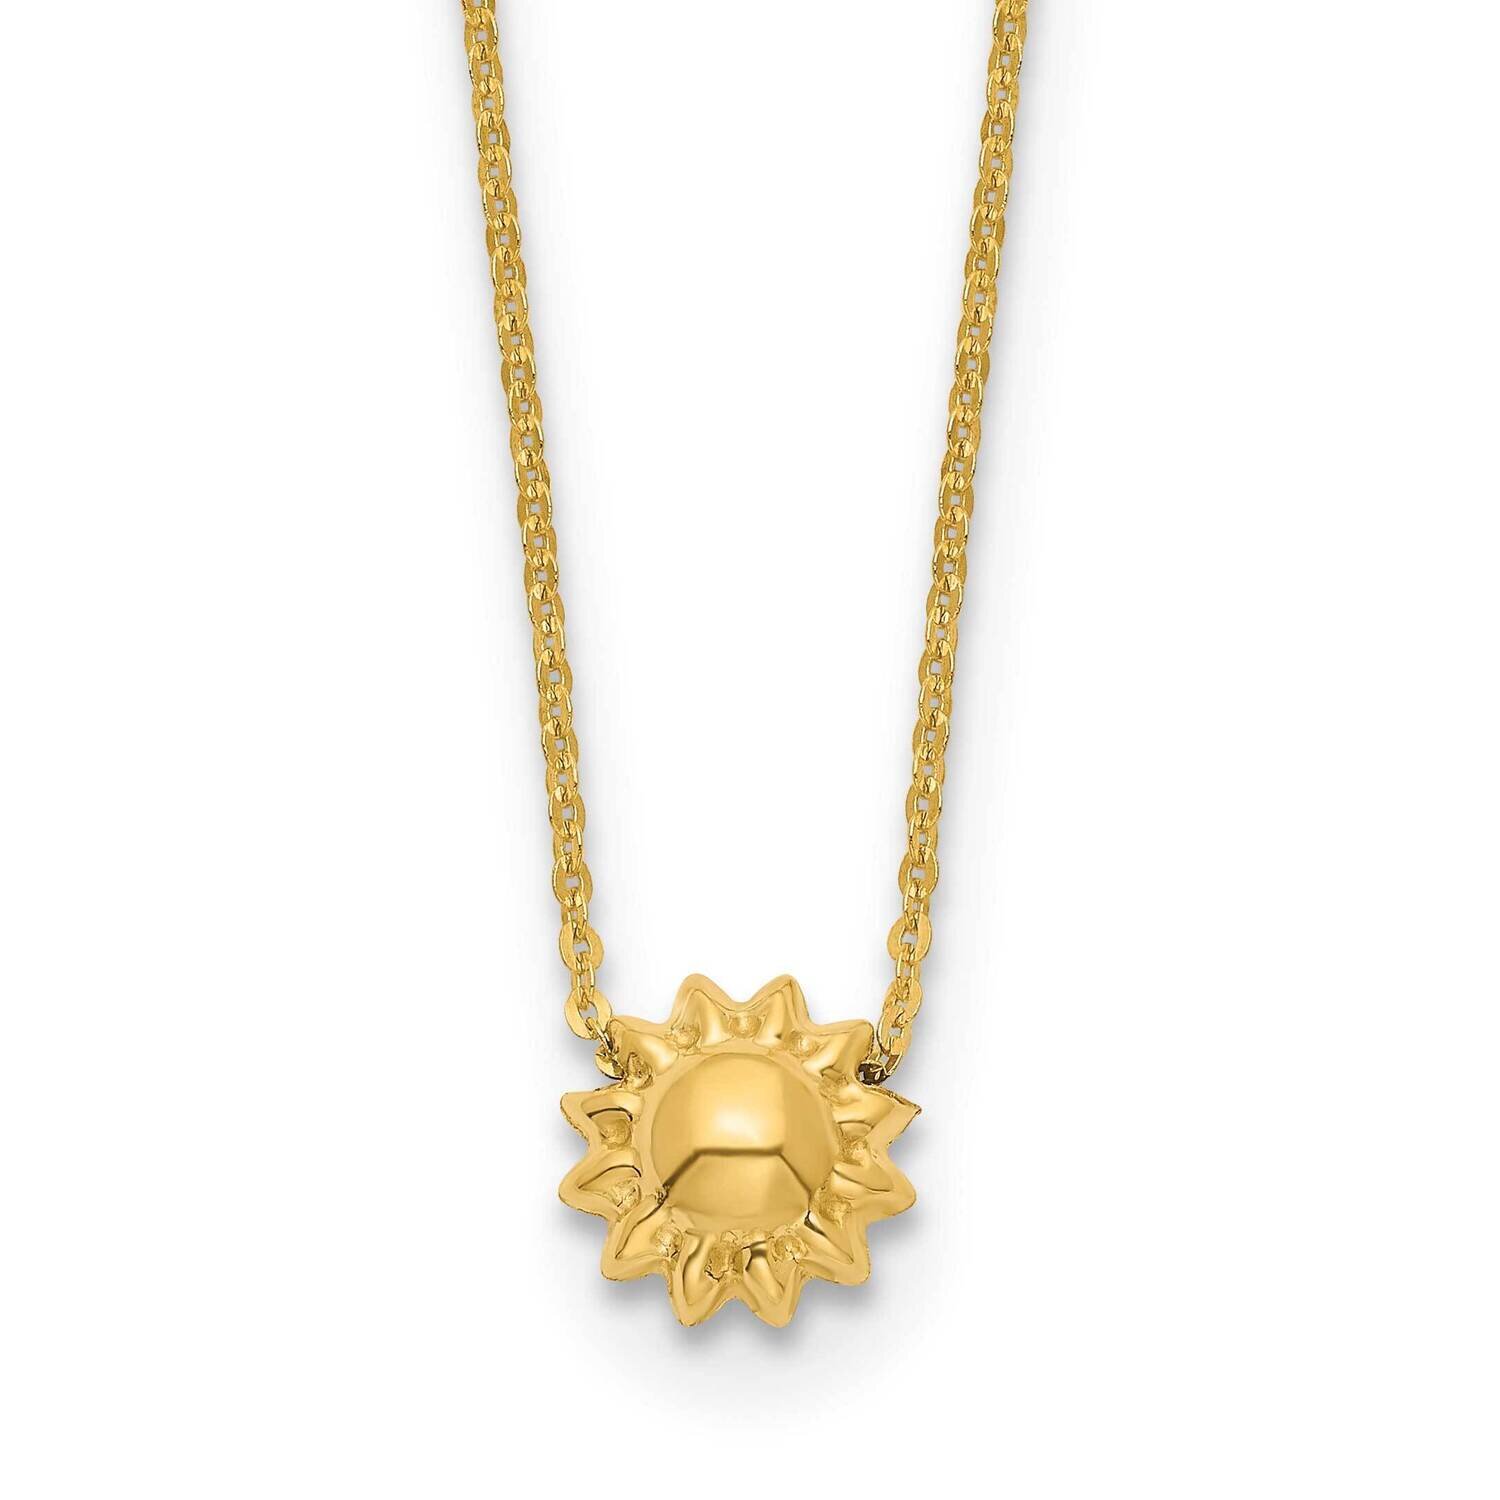 Puffed Sun 16.5 Inch Necklace 14k Gold Polished SF2900-16.5